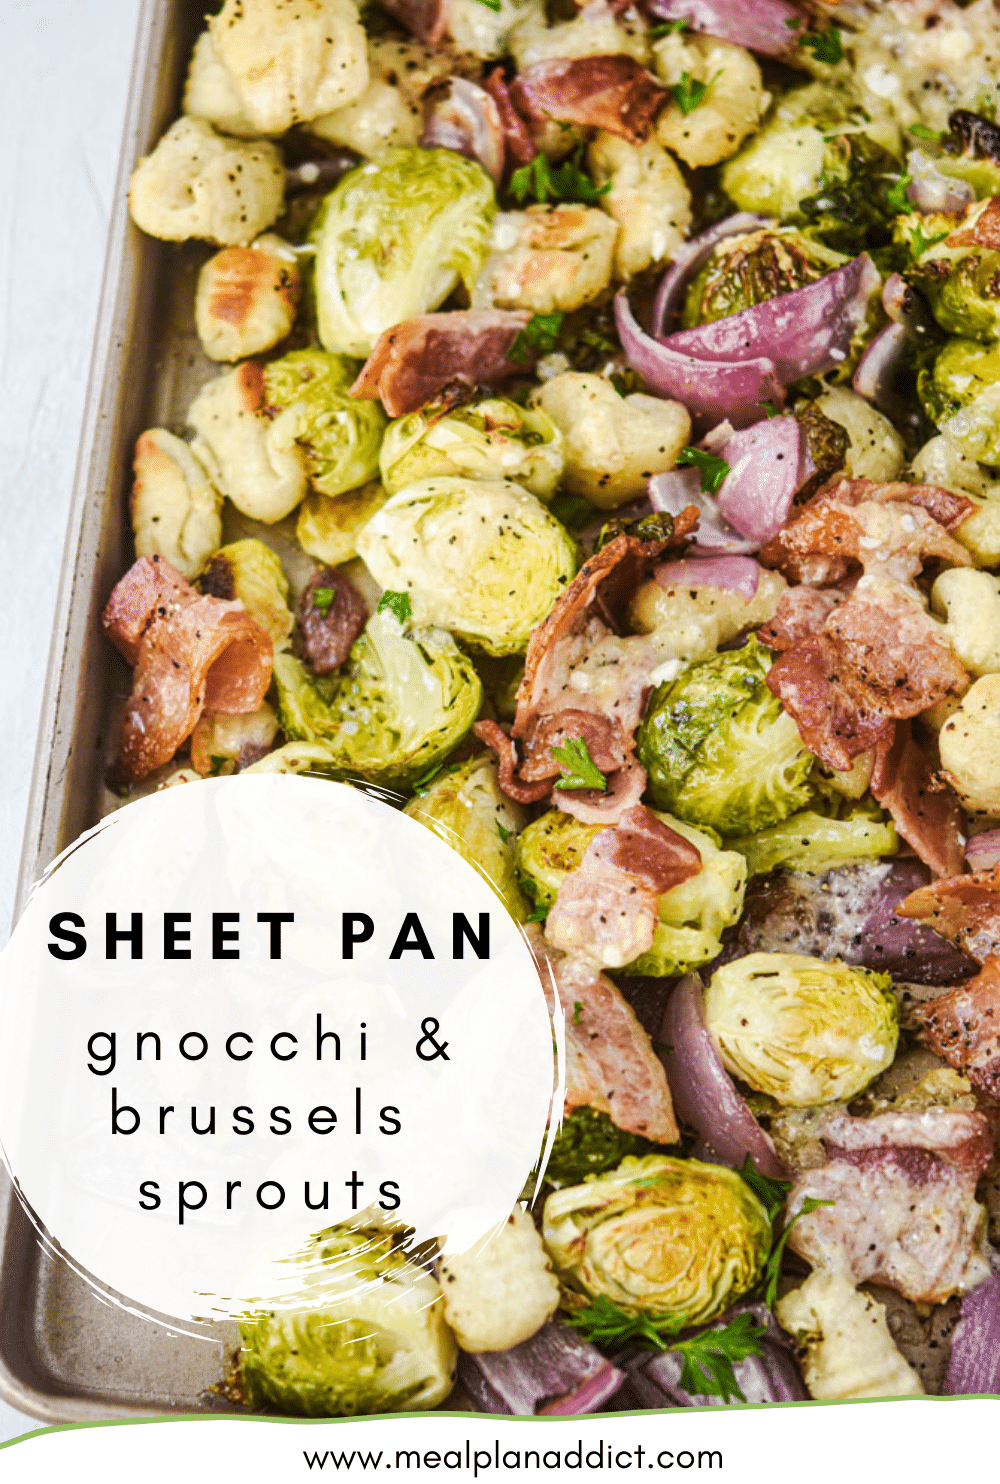 sheet pan gnocchi and brussels sprouts pin